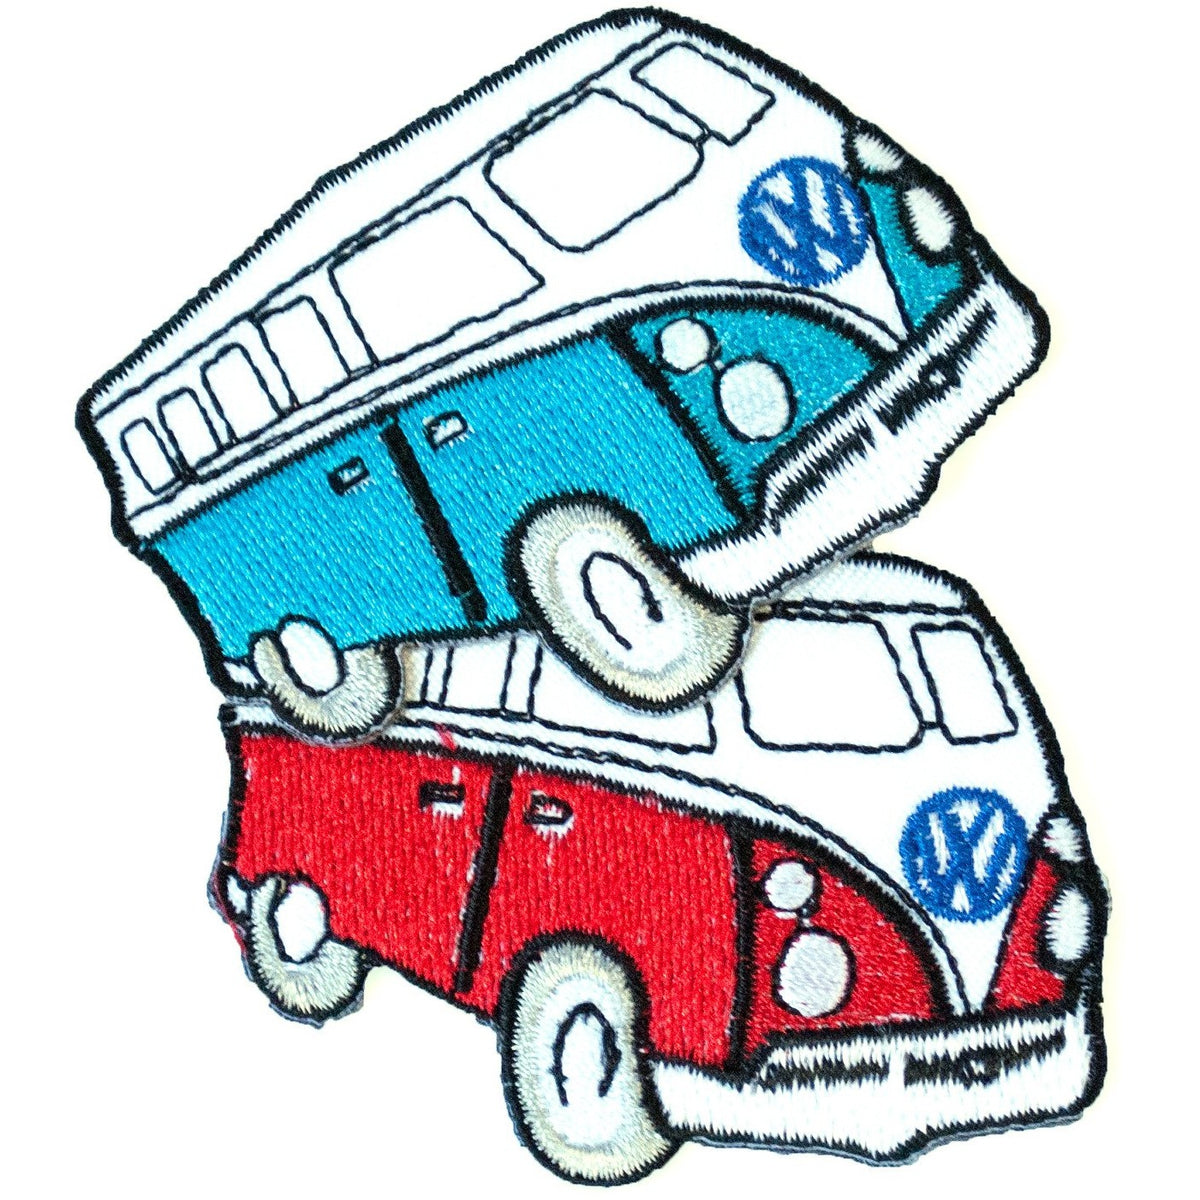 VW Bus Patches – Cali Kind Clothing Co.